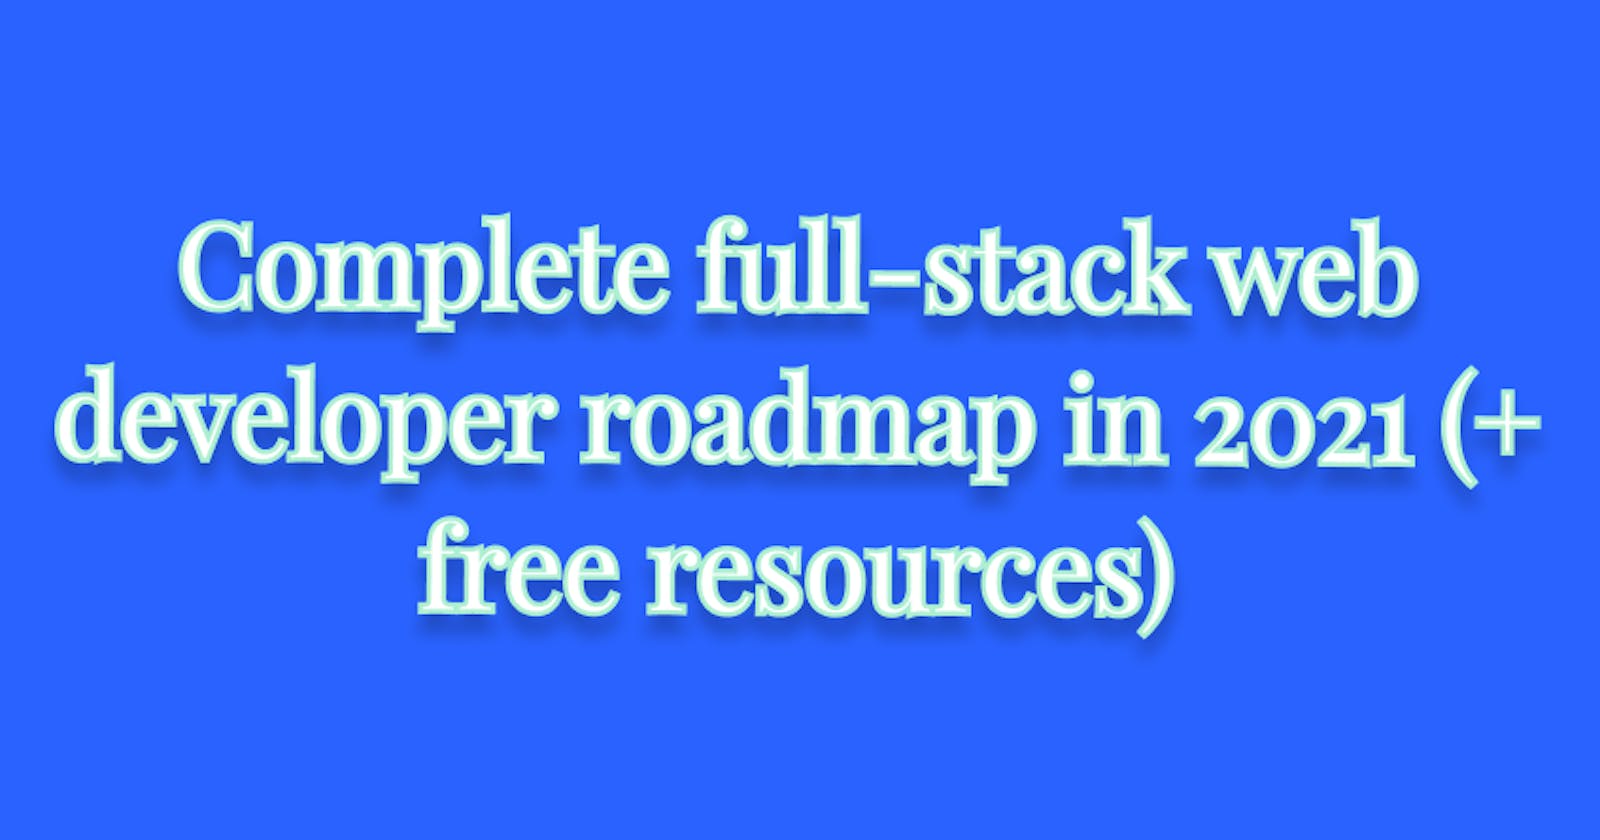 Complete full-stack web developer roadmap in 2021 (+ free resources)